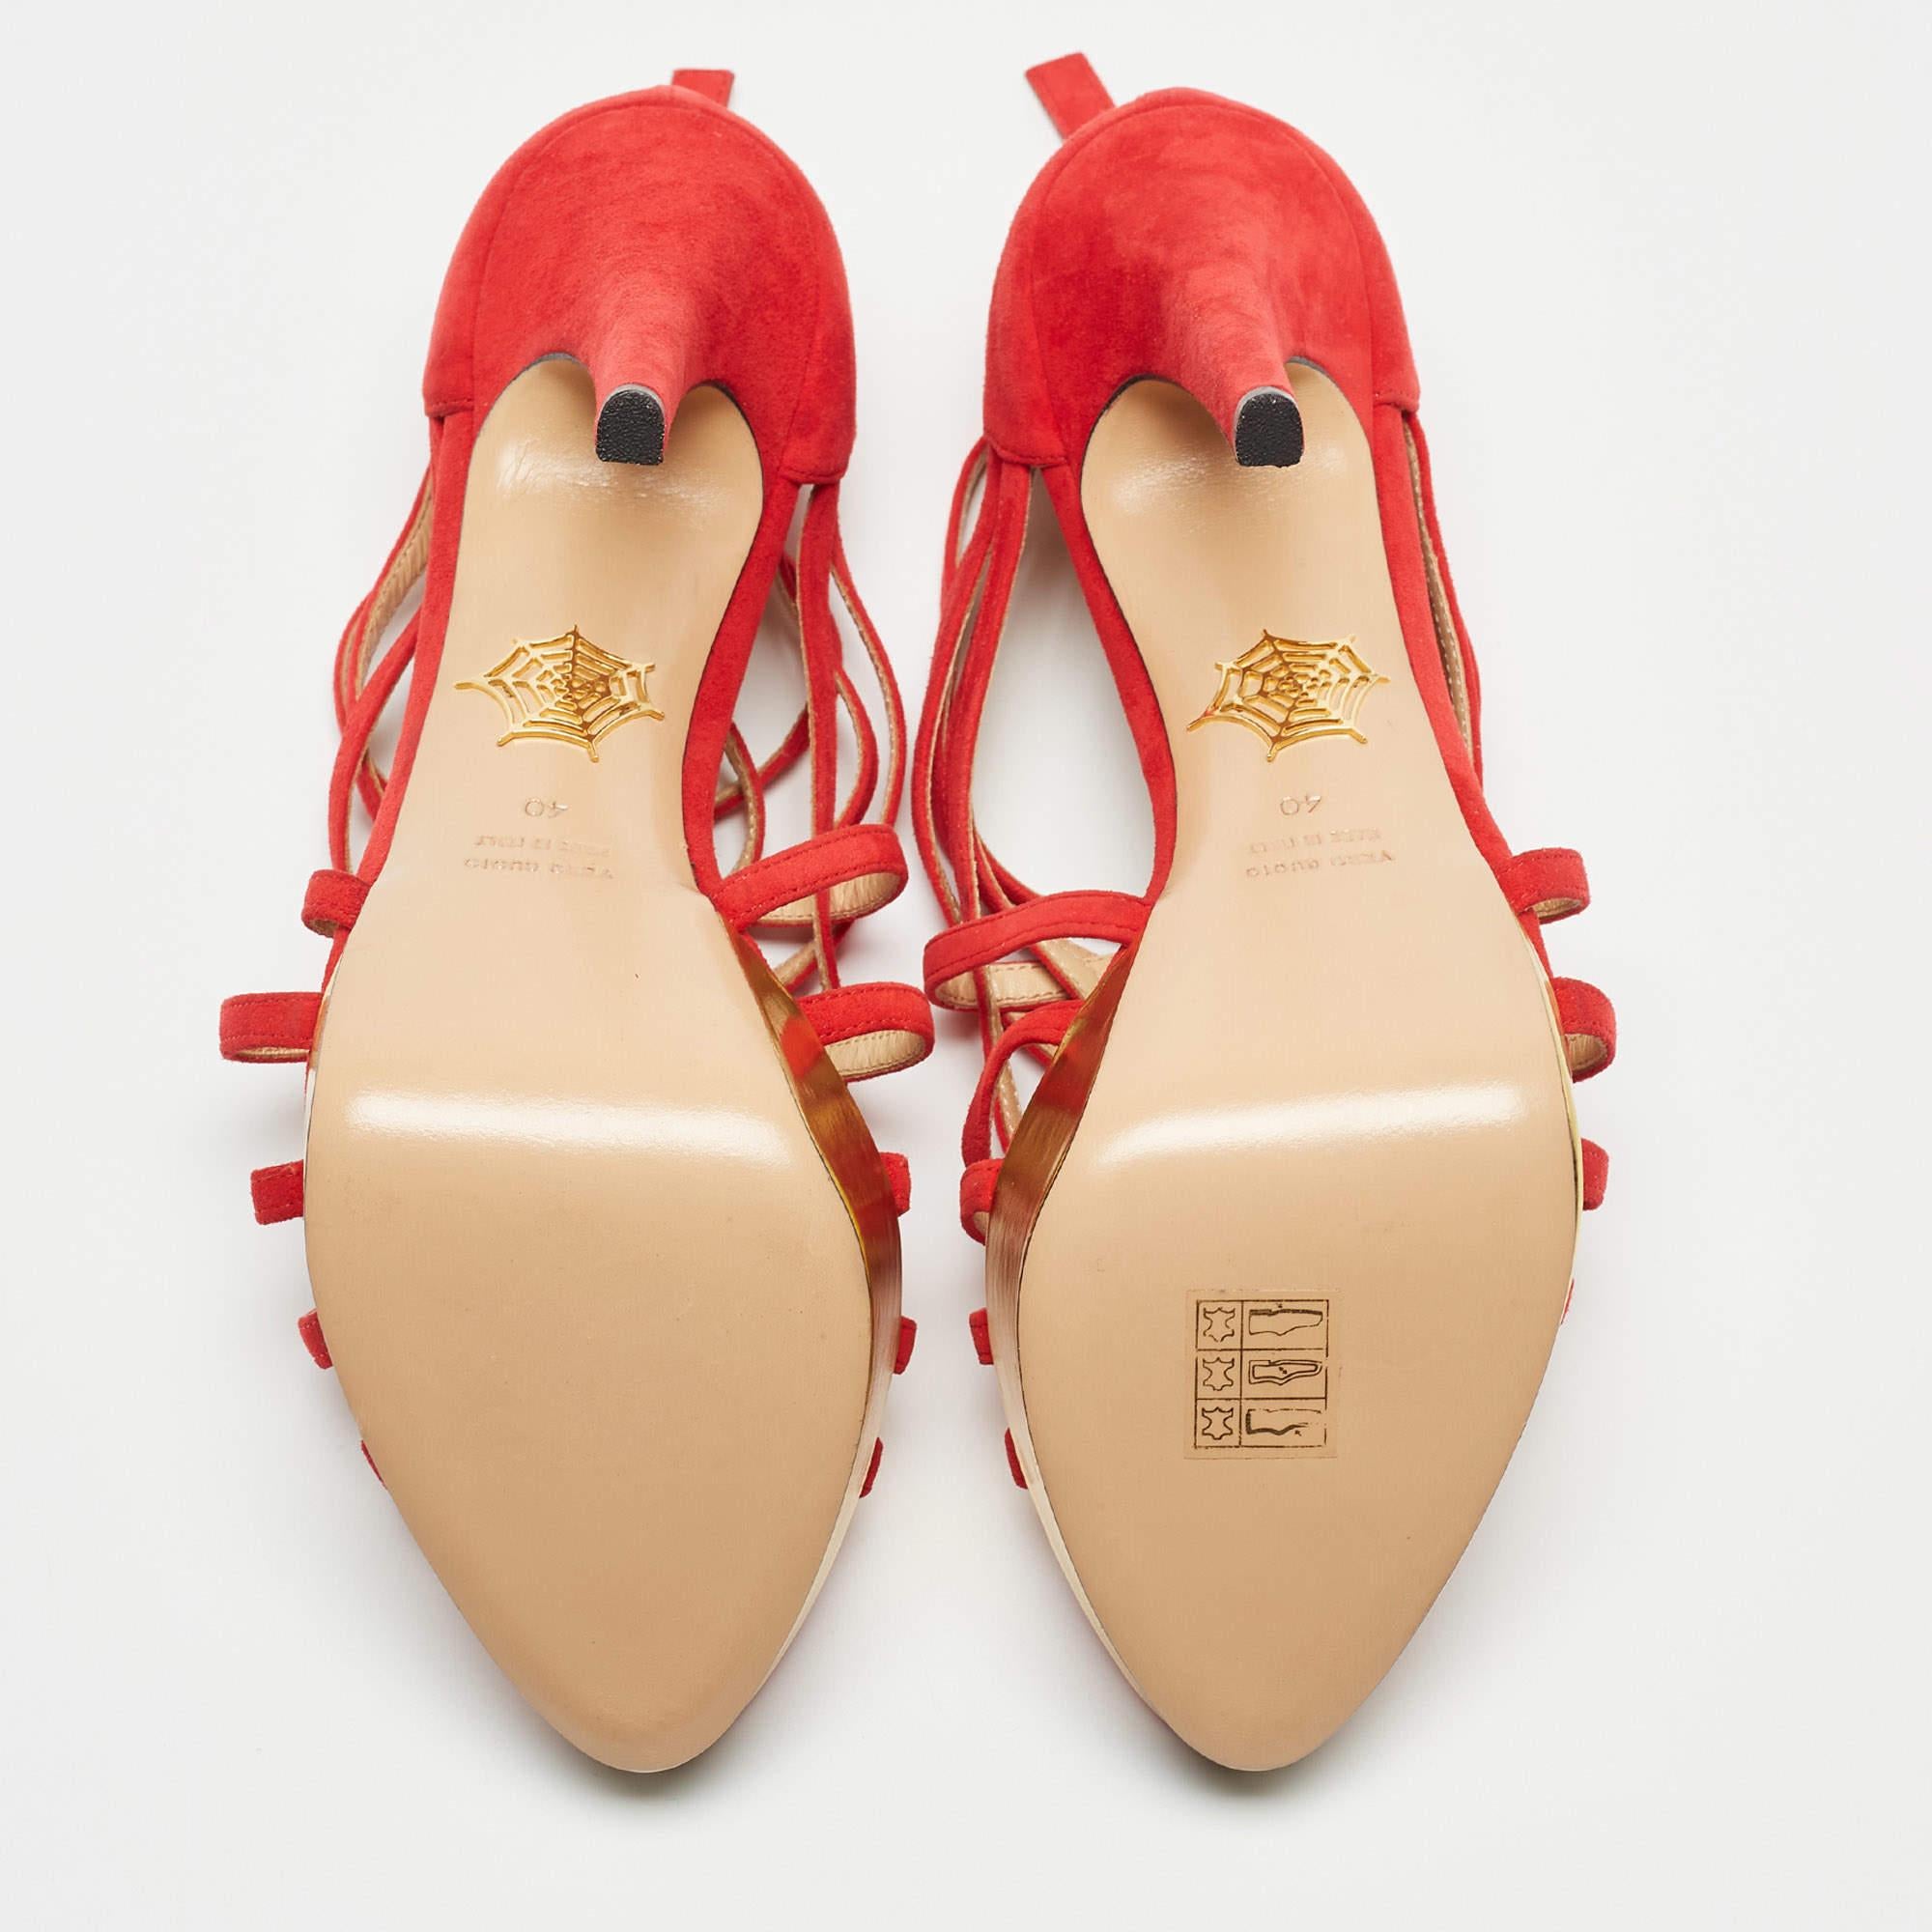 Charlotte Olympia Red Suede Strappy Platform Sandals Size 40 5